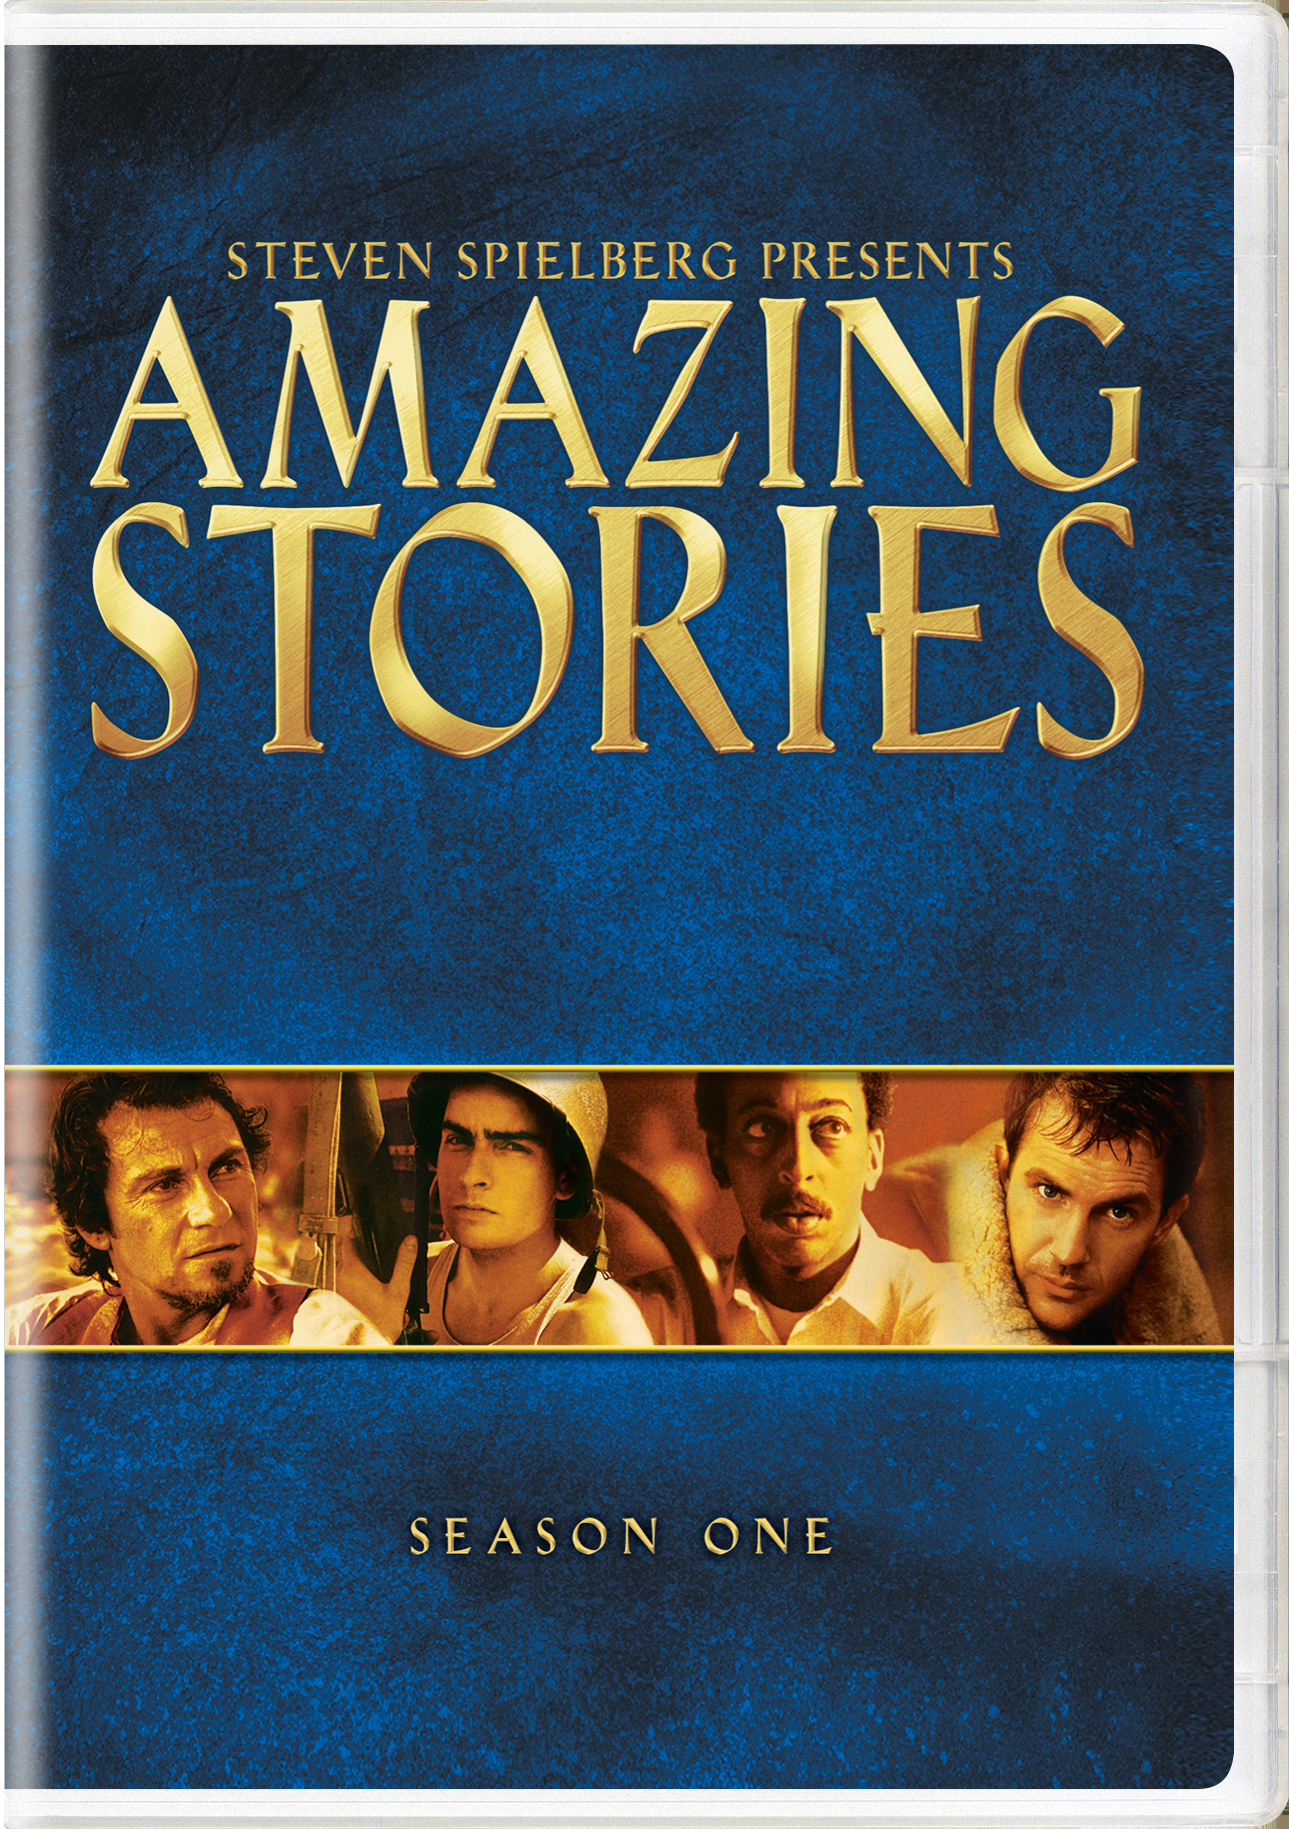 Amazing Stories: Season 1 - DVD [ 1984 ]  - Sci Fi Television On DVD - TV Shows On GRUV